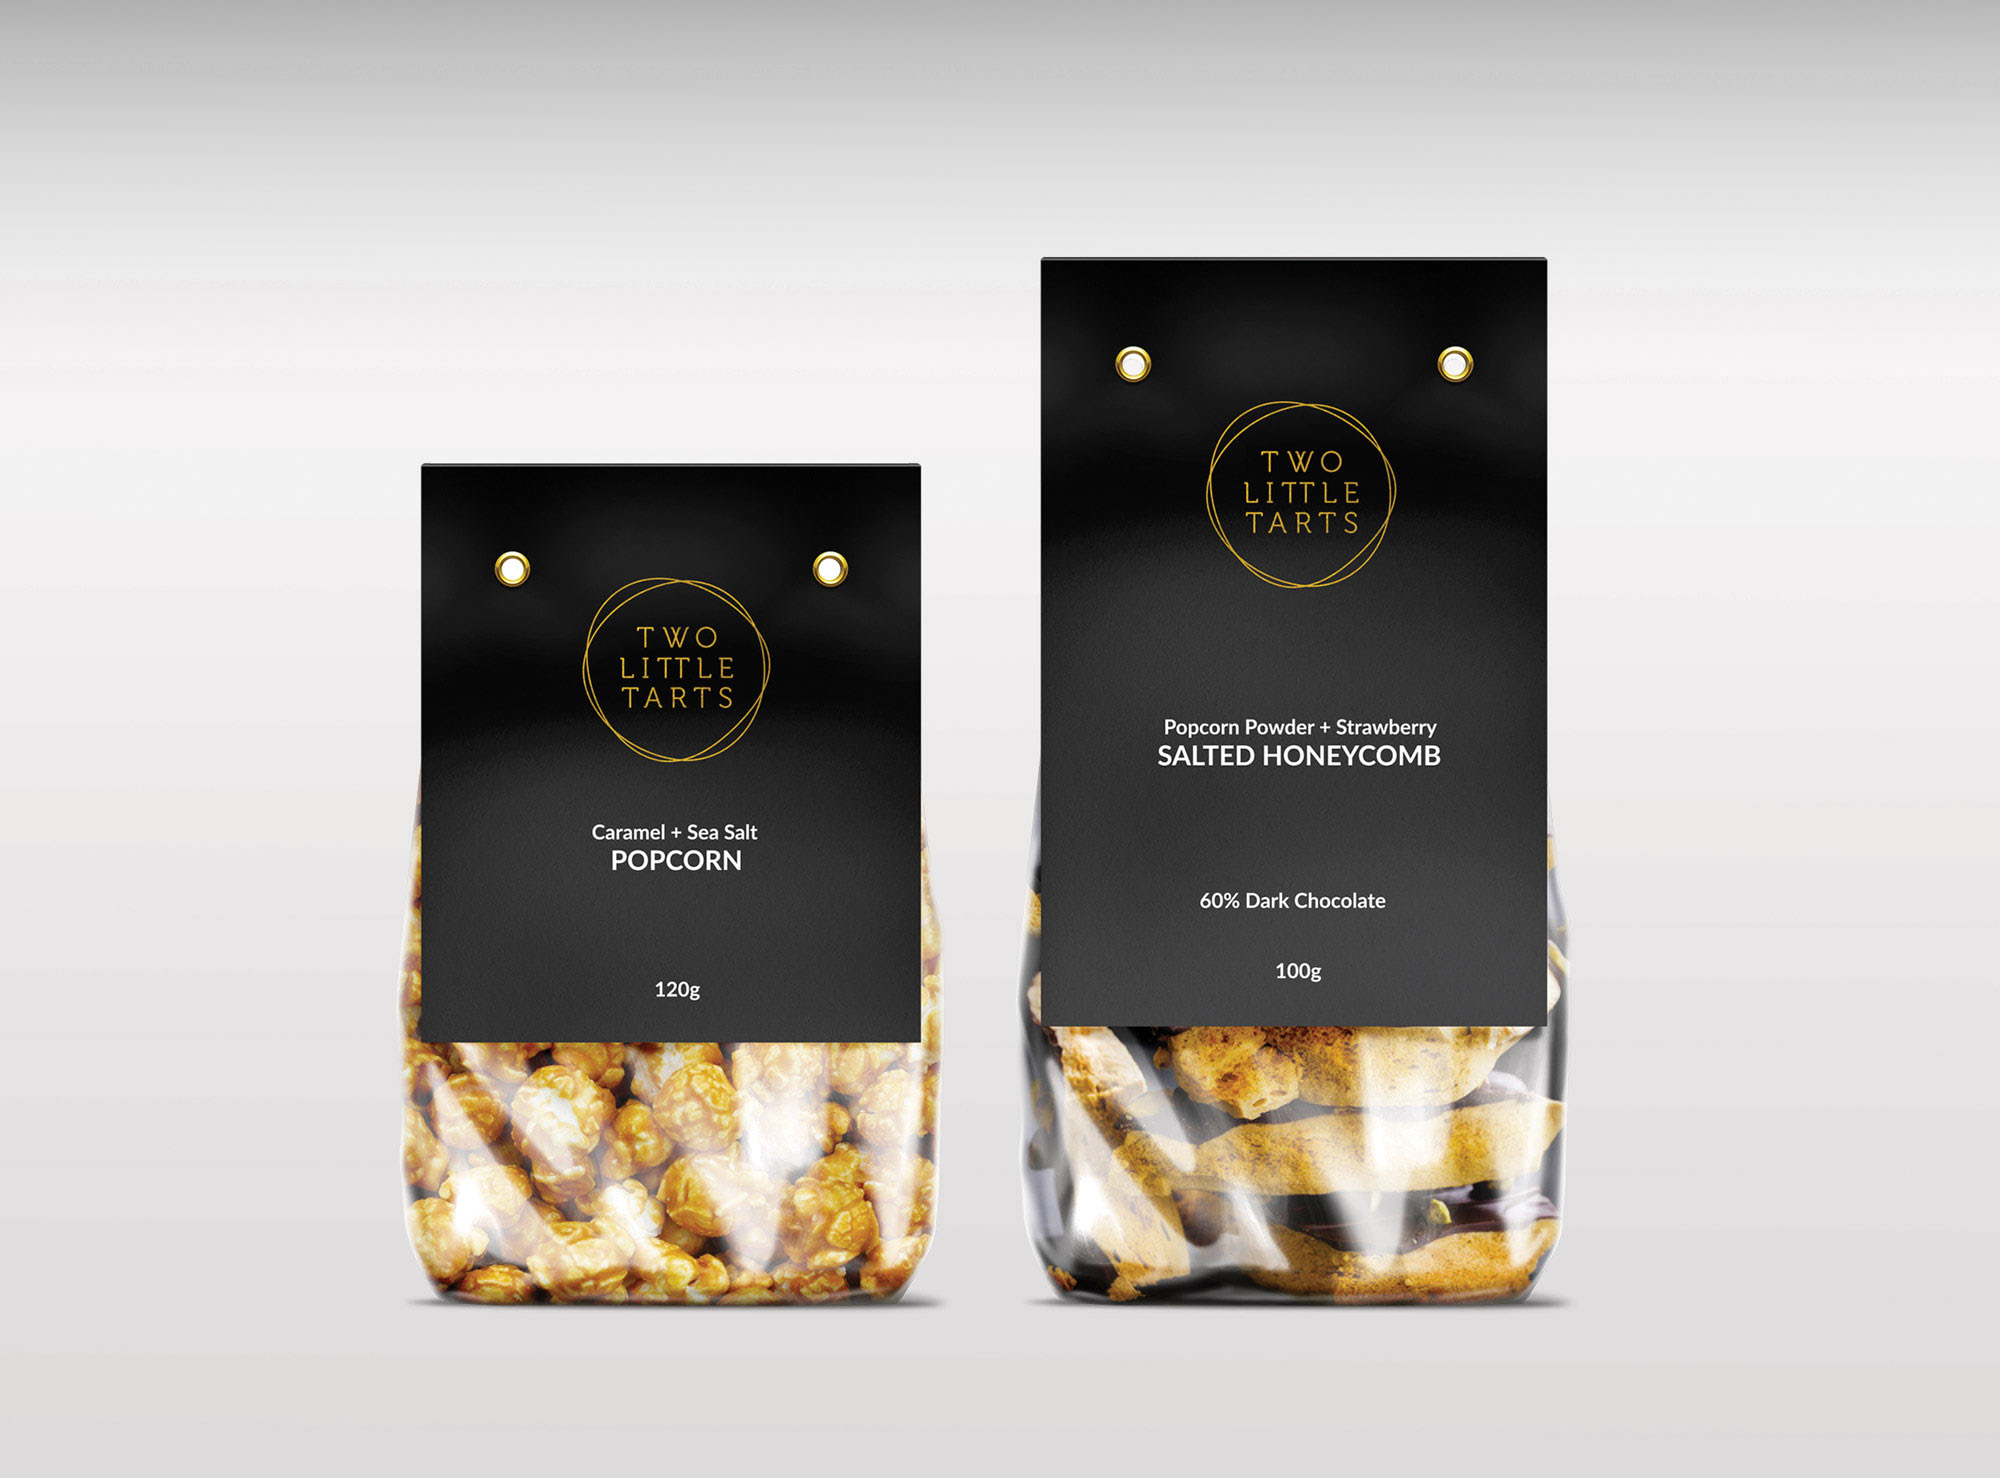 Logo and packaging label design for Two Little Tarts